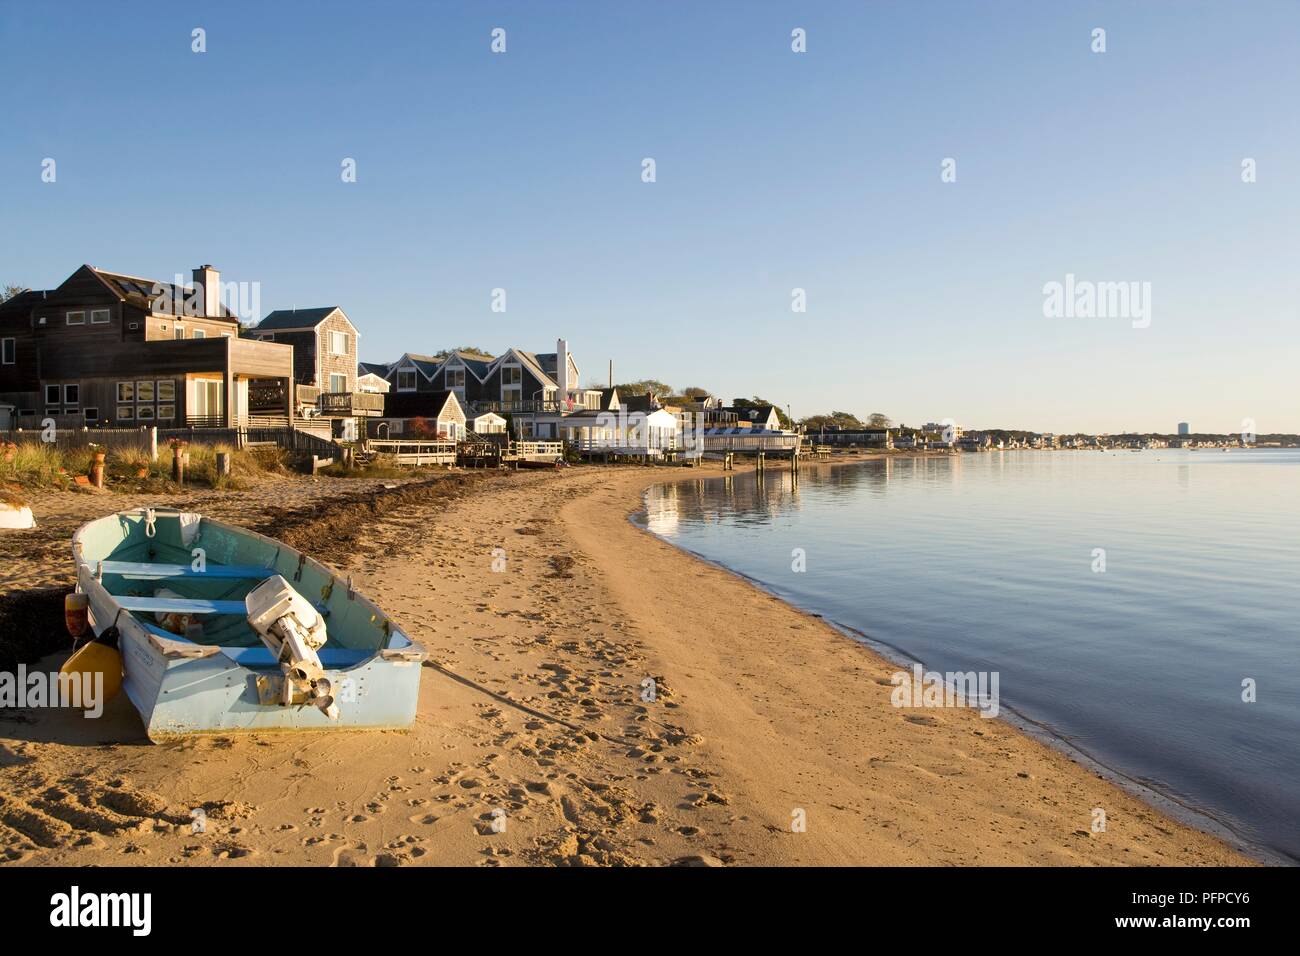 USA, Massachusetts, Cape Cod, Provincetown, small fishing boat on beach lined with houses Stock Photo